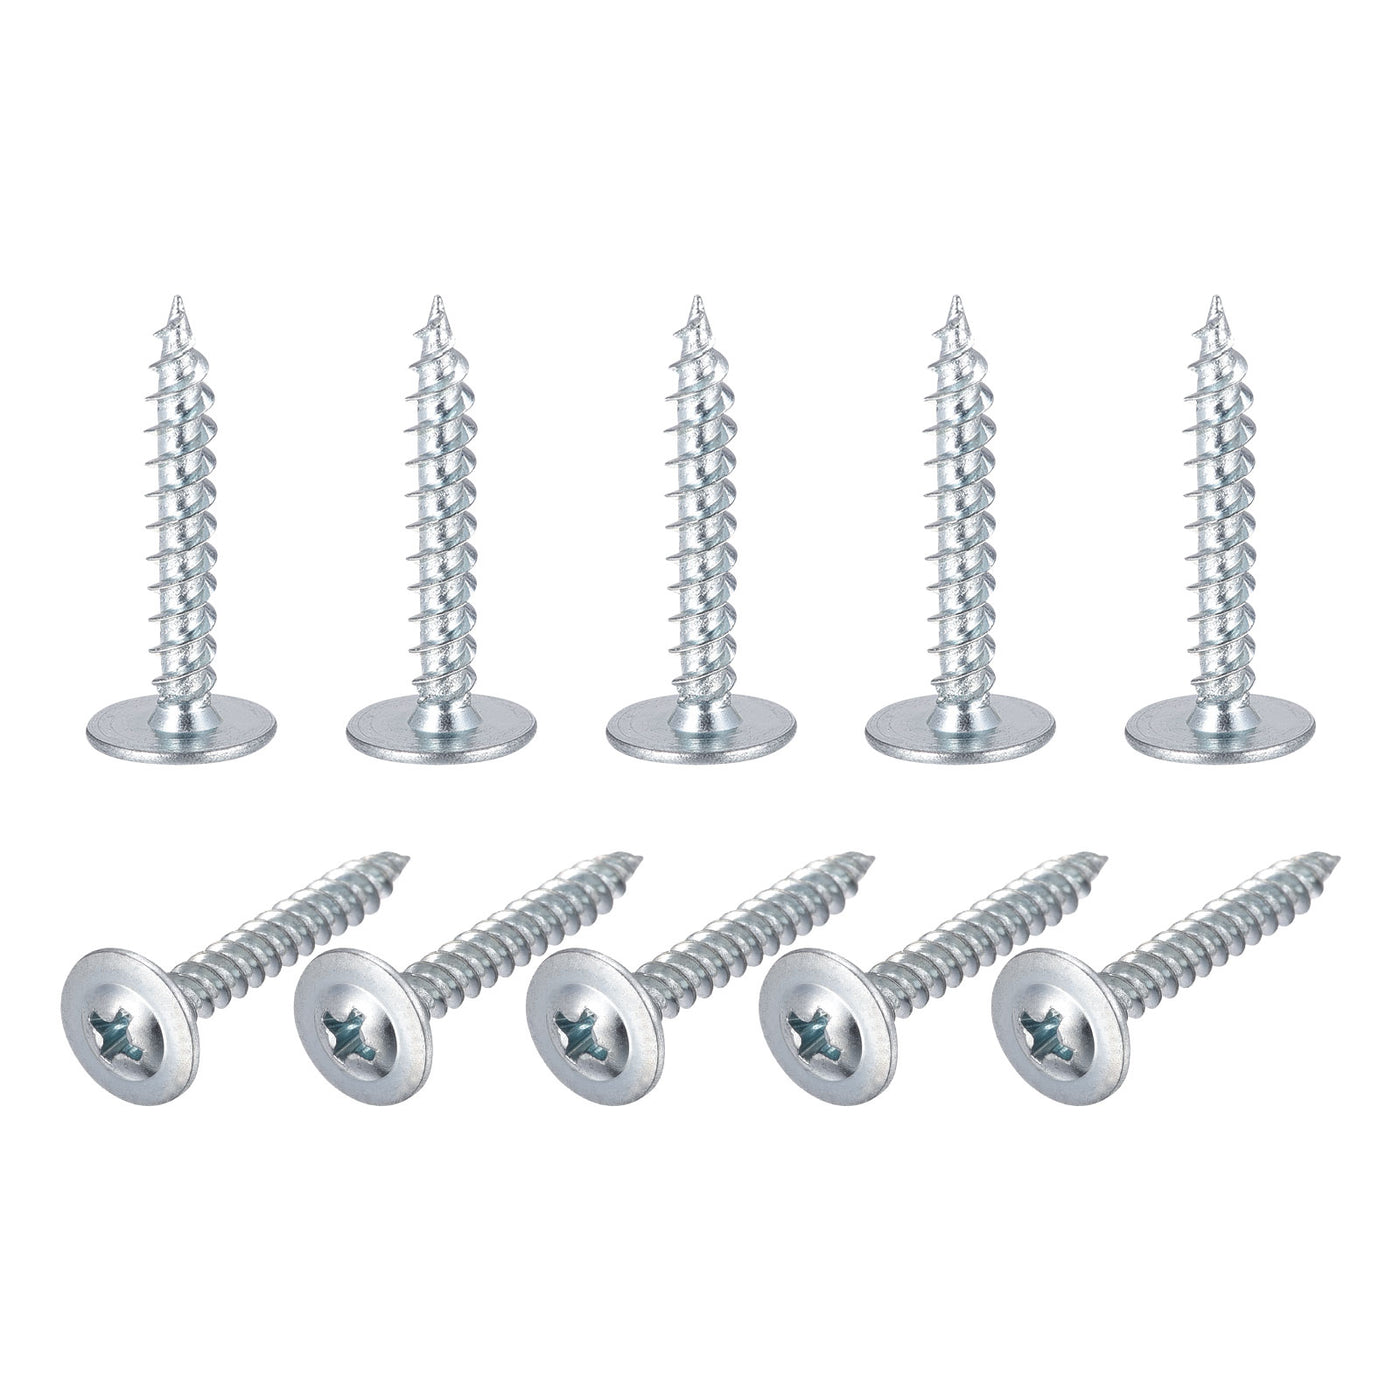 uxcell Uxcell Phillips Head Self Tapping Screws, #8 x 1" Carbon Steel Wood Sheet Metal Screw 50pcs